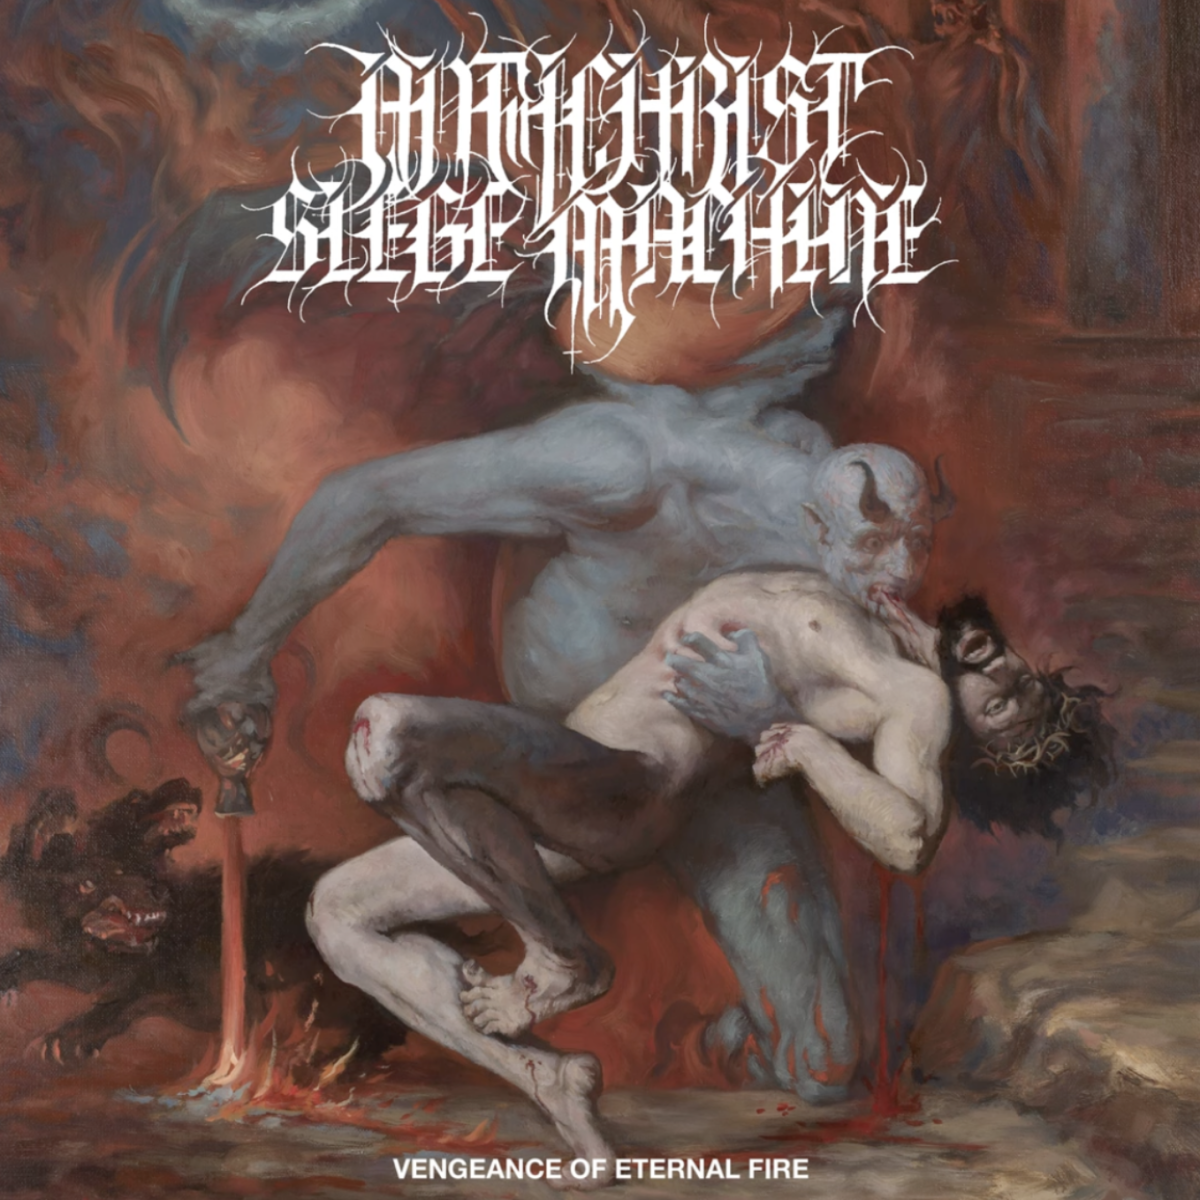 Extreme metal band Antichrist Siege Machine released their newest single Sisera, which features clean production and creates an aggressive and demonic atmosphere for listeners.